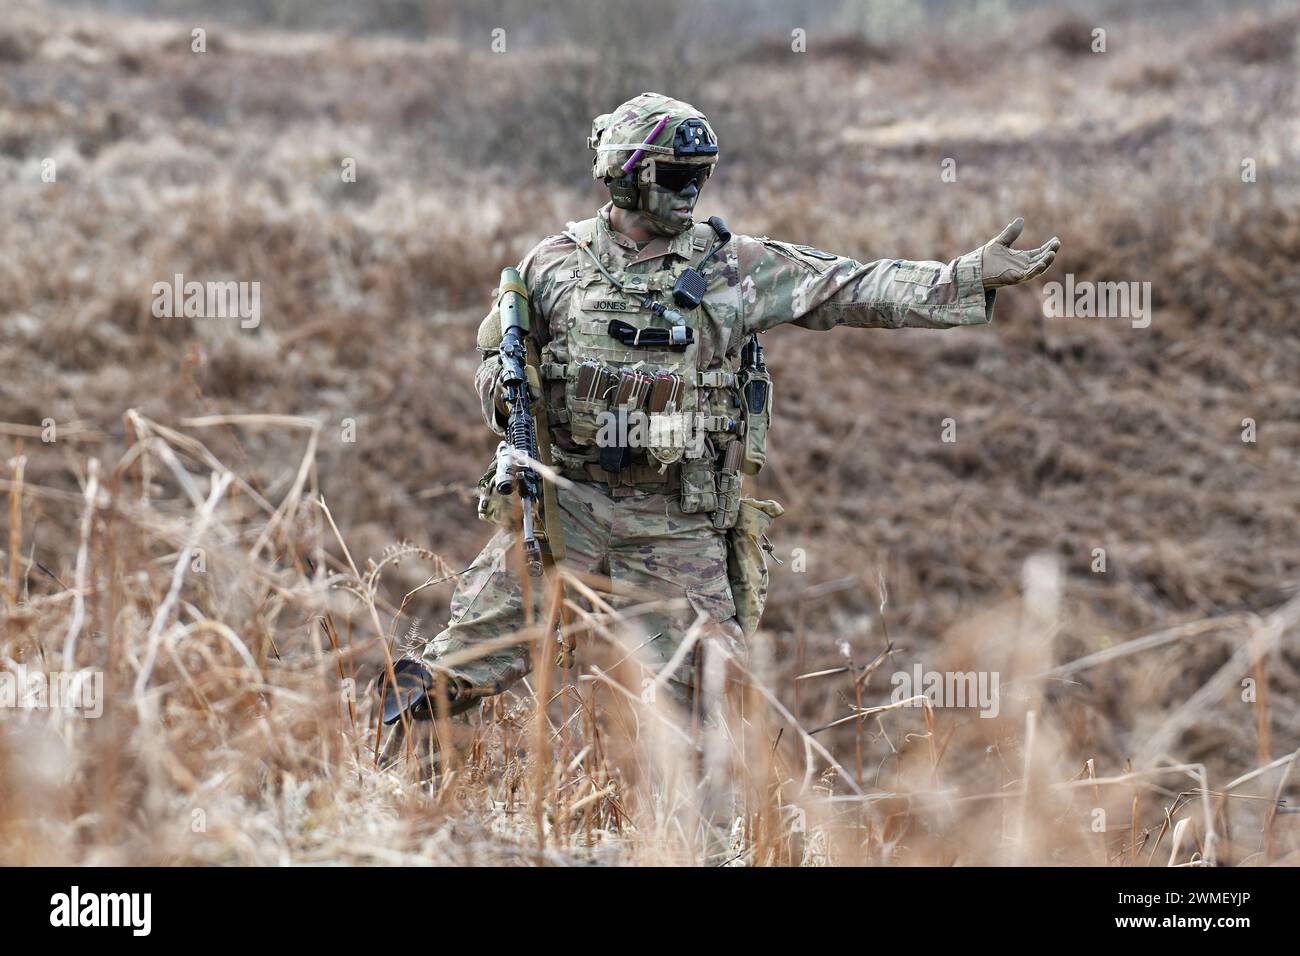 A U.S. Army Paratrooper assigned to the 1st Battalion, 503rd Infantry Regiment, 173rd Airborne Brigade, moves toward an objective during team blank-fire and tactical movement training  as part of Eagle Ursa at the training range in Slunj, Croatia, Feb. 24, 2024. The 173rd Airborne Brigade is the U.S. Army's Contingency Response Force in Europe, providing rapidly deployable forces to the United States European, African, and Central Command areas of responsibility. Forward deployed across Italy and Germany, the brigade routinely trains alongside NATO allies and partners to build partnerships and Stock Photo